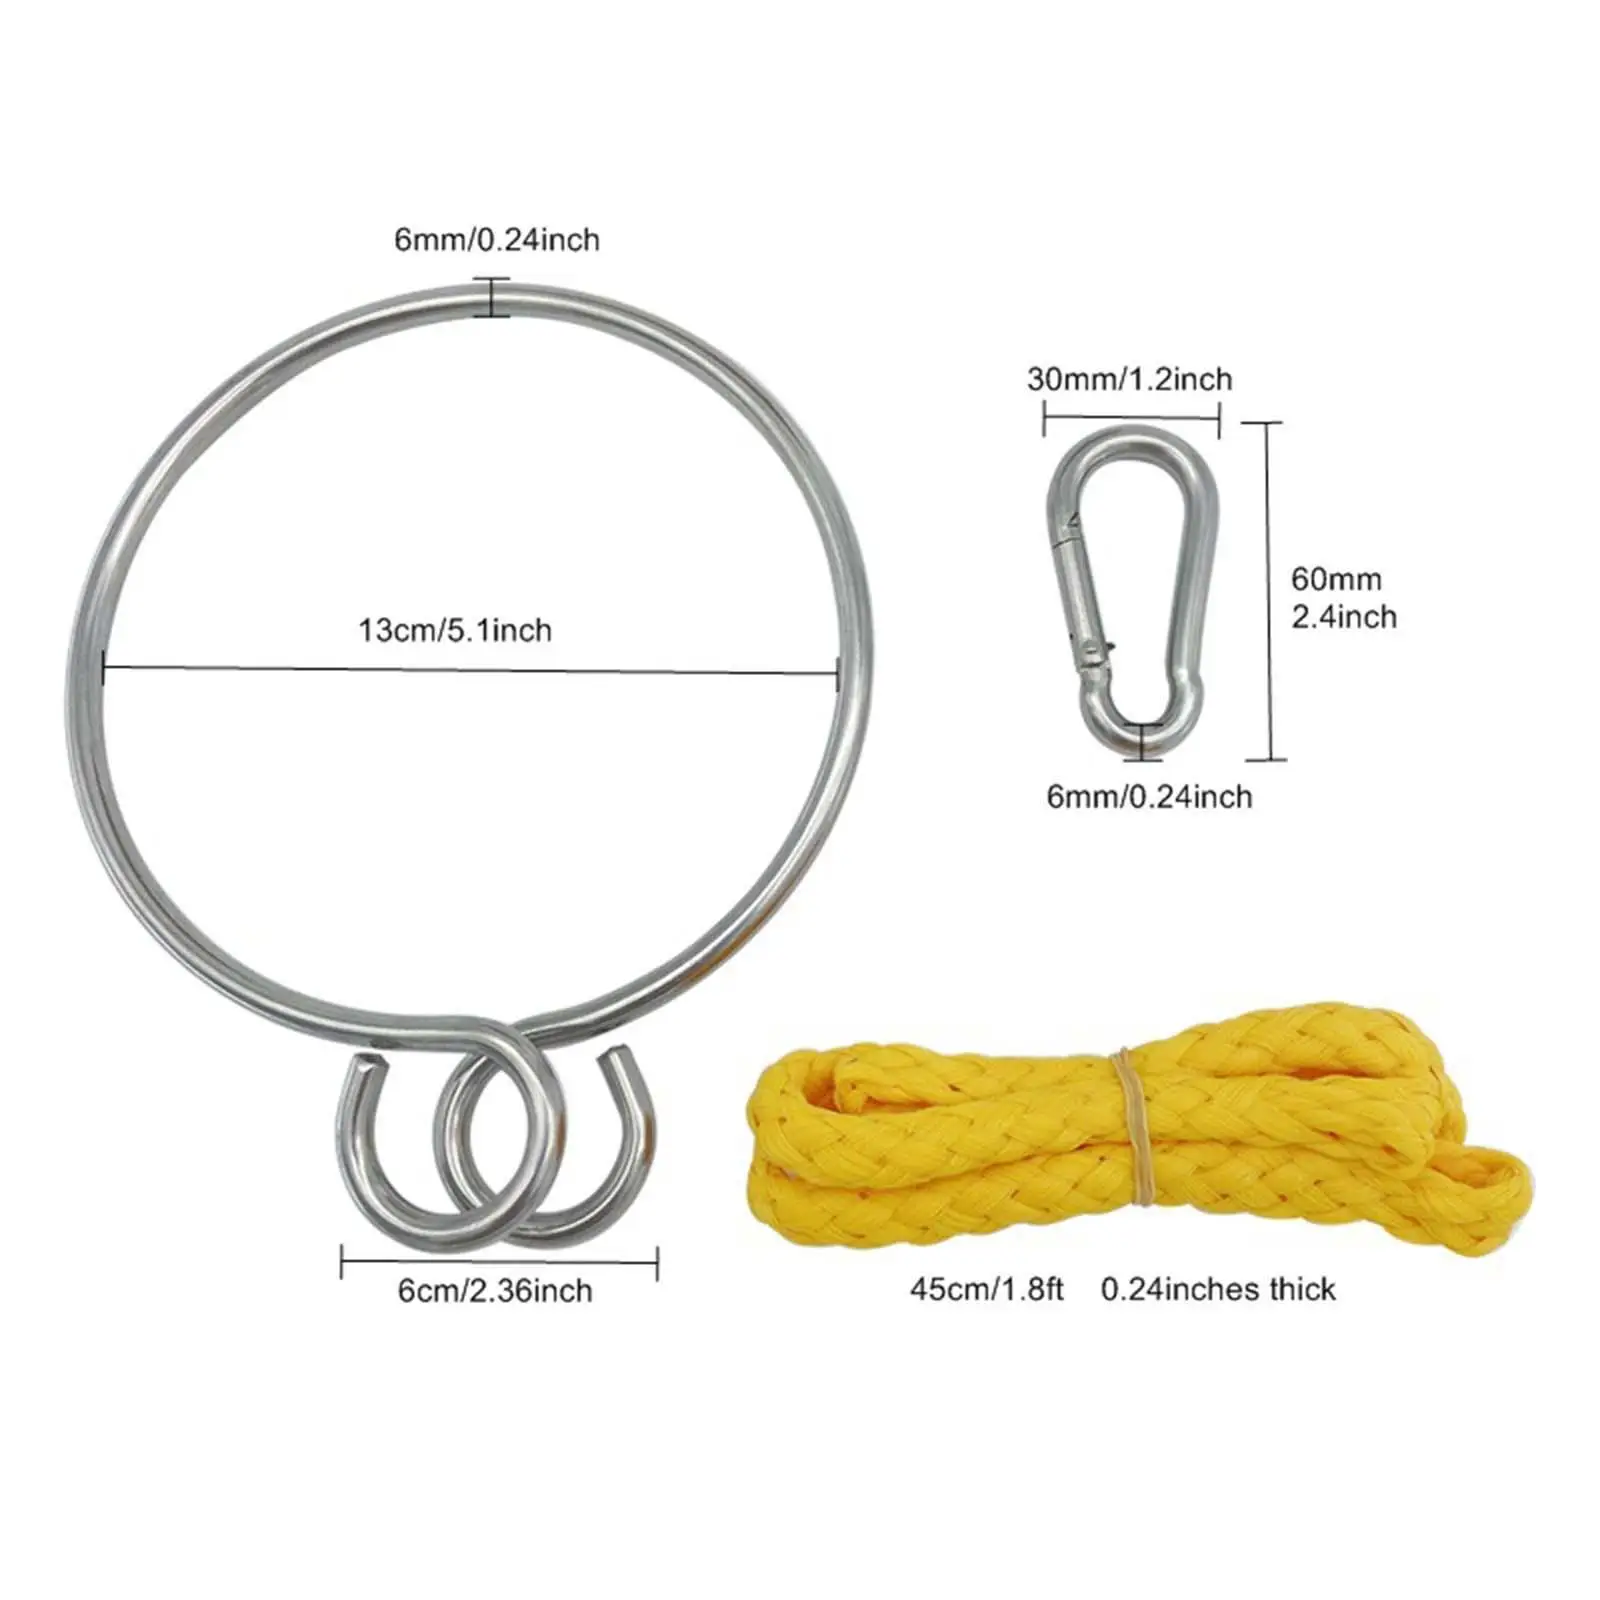 Anchor Retrieving System Ring and Rope High Performance for Boat Sailing